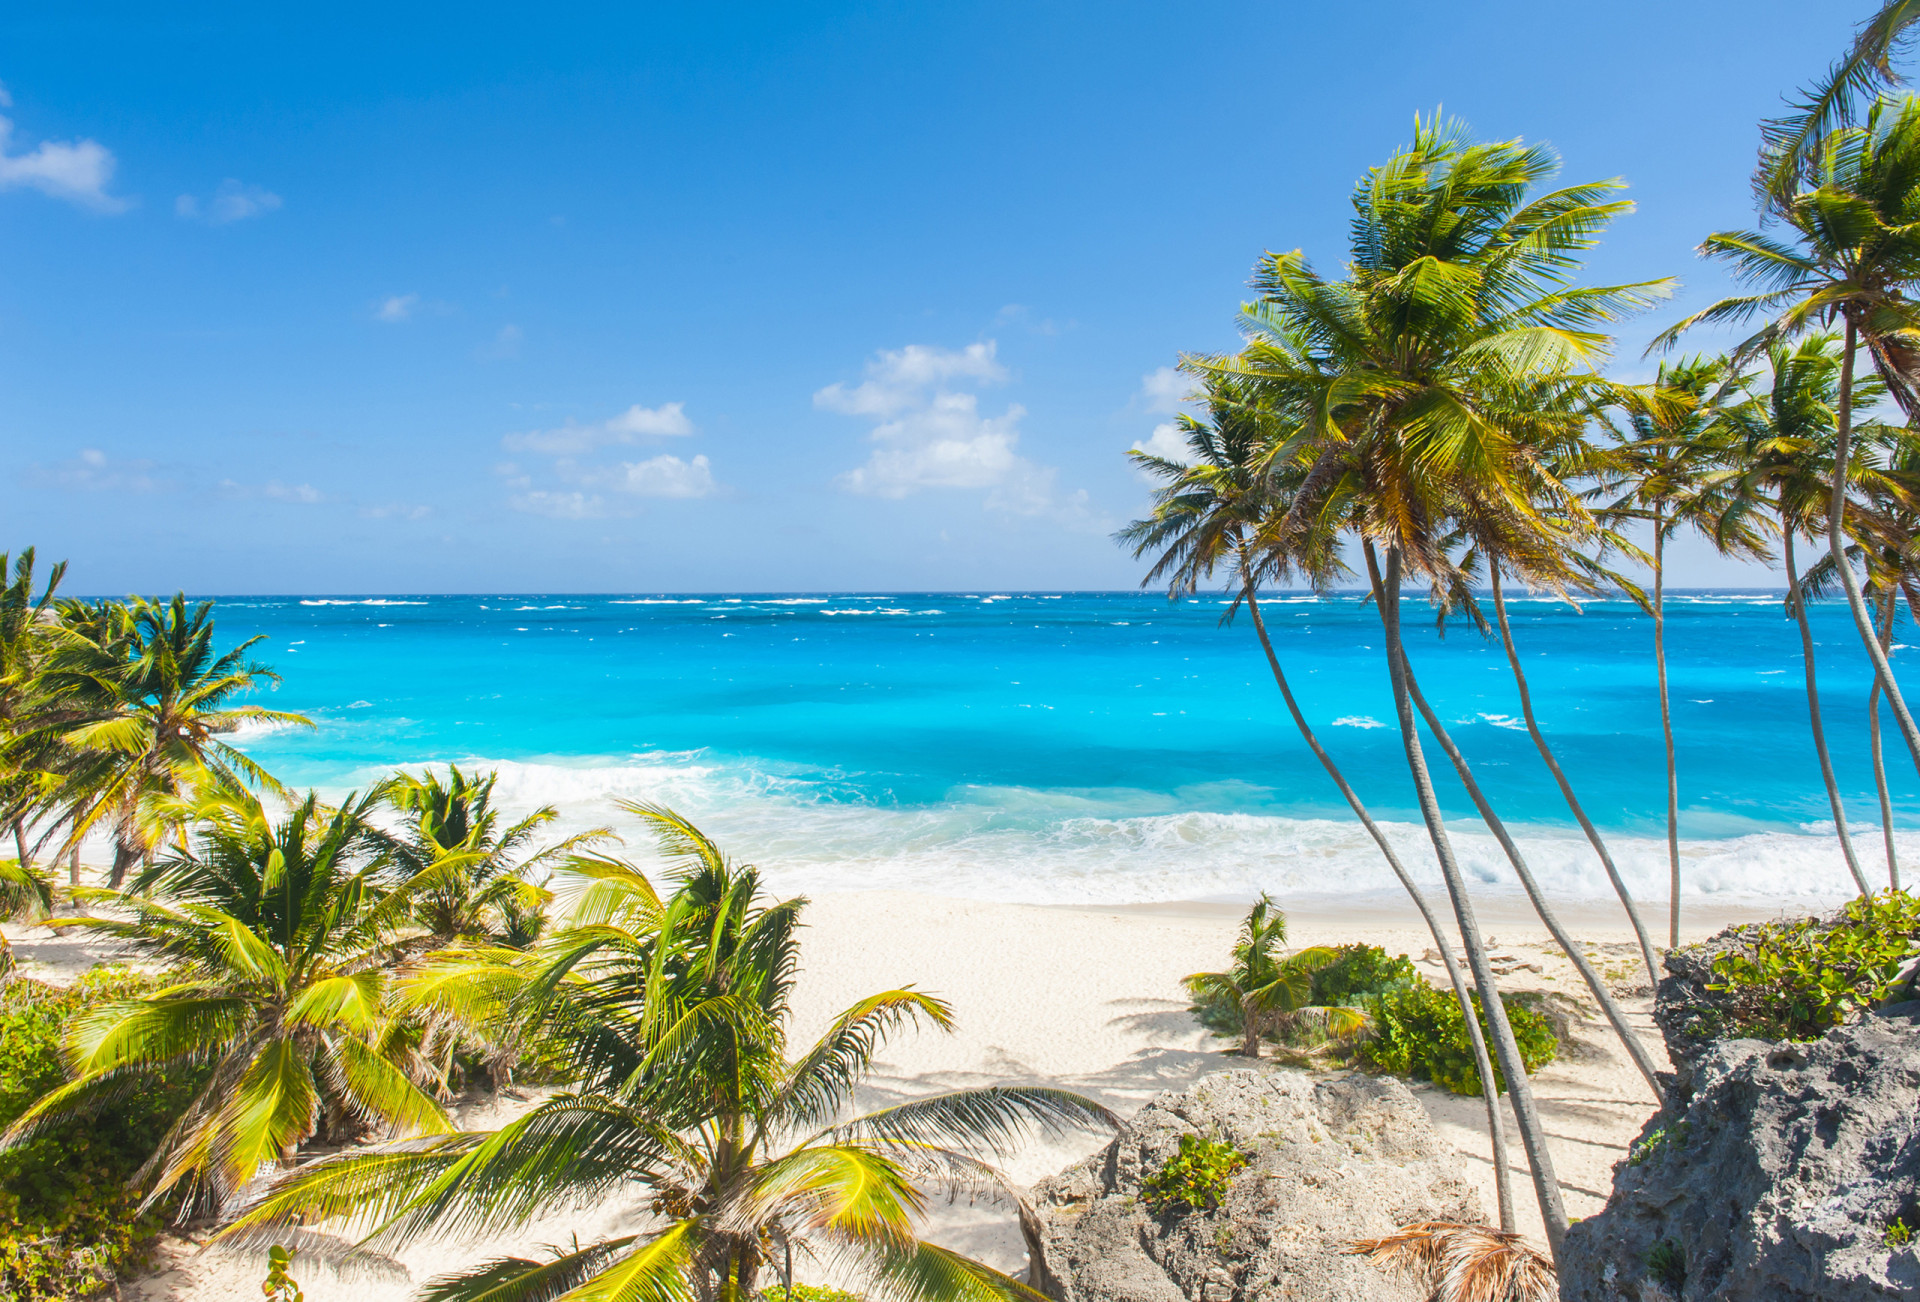 <p>Most of the Caribbean islands charge a tourist tax. The price ranges depending on the island.</p><p><a href="https://www.msn.com/en-my/community/channel/vid-7xx8mnucu55yw63we9va2gwr7uihbxwc68fxqp25x6tg4ftibpra?cvid=94631541bc0f4f89bfd59158d696ad7e">Follow us and access great exclusive content every day</a></p>